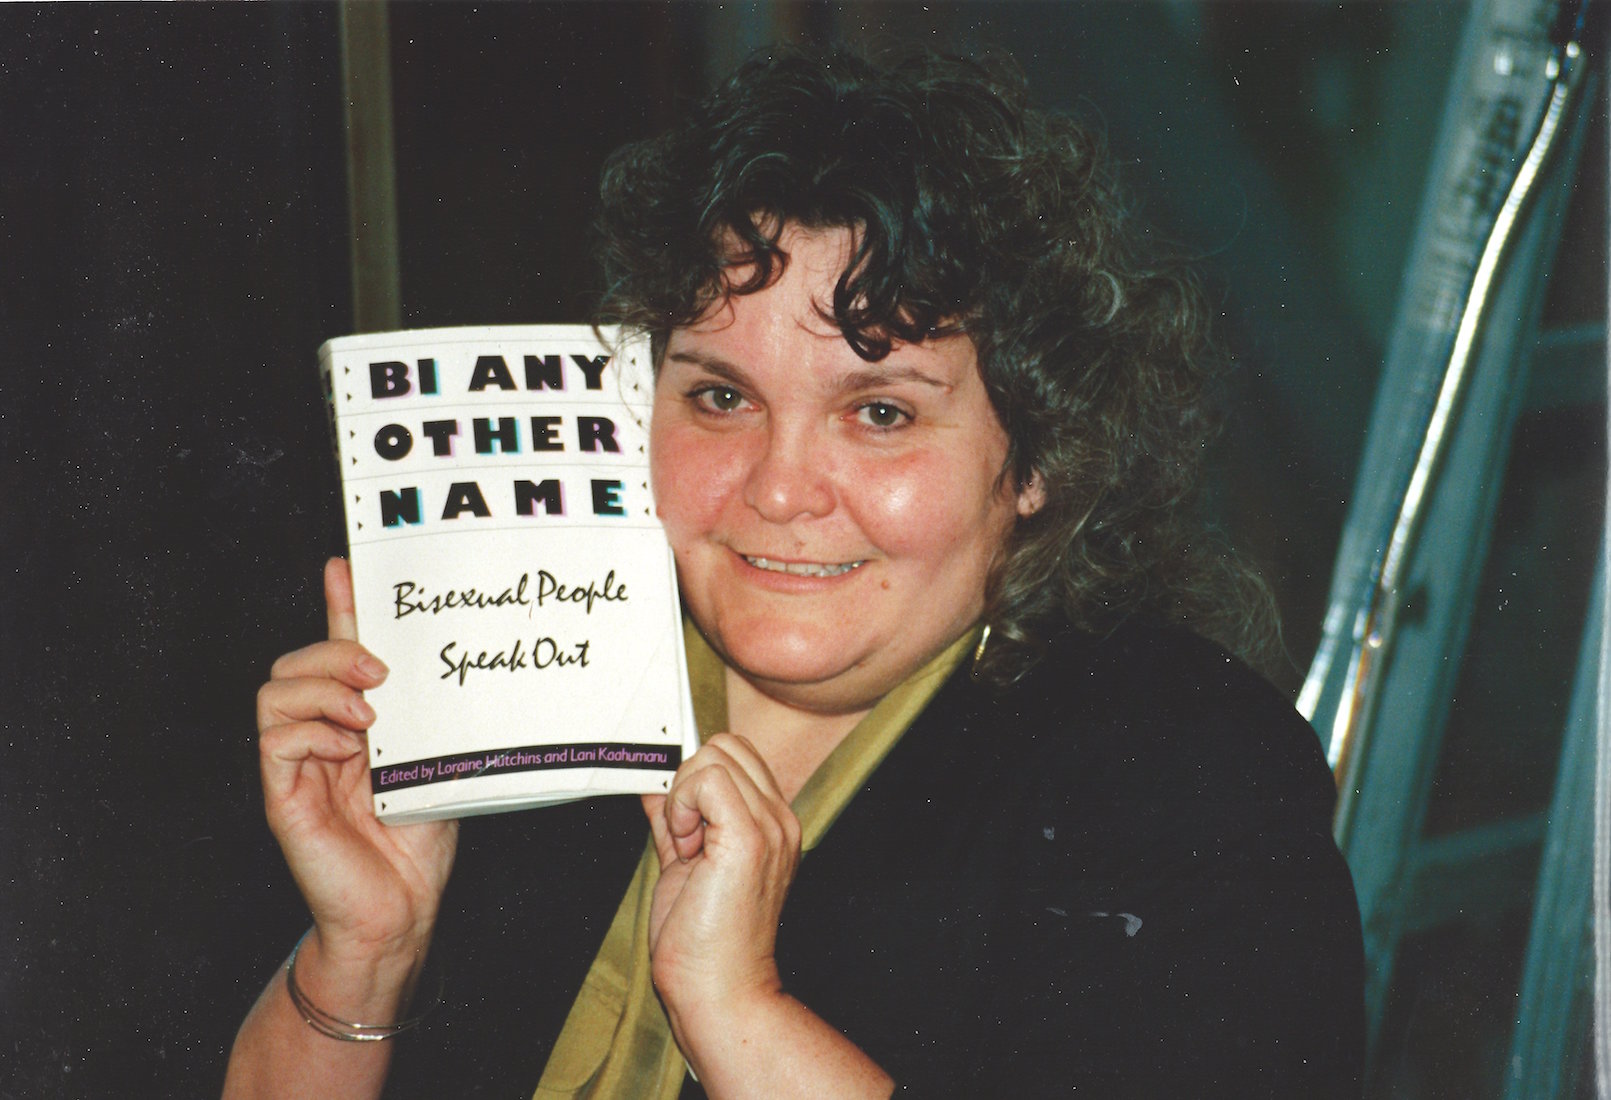 Lani at her first book reading for “Bi Any Other Name,” 1991. Photo credit: David Lourea.